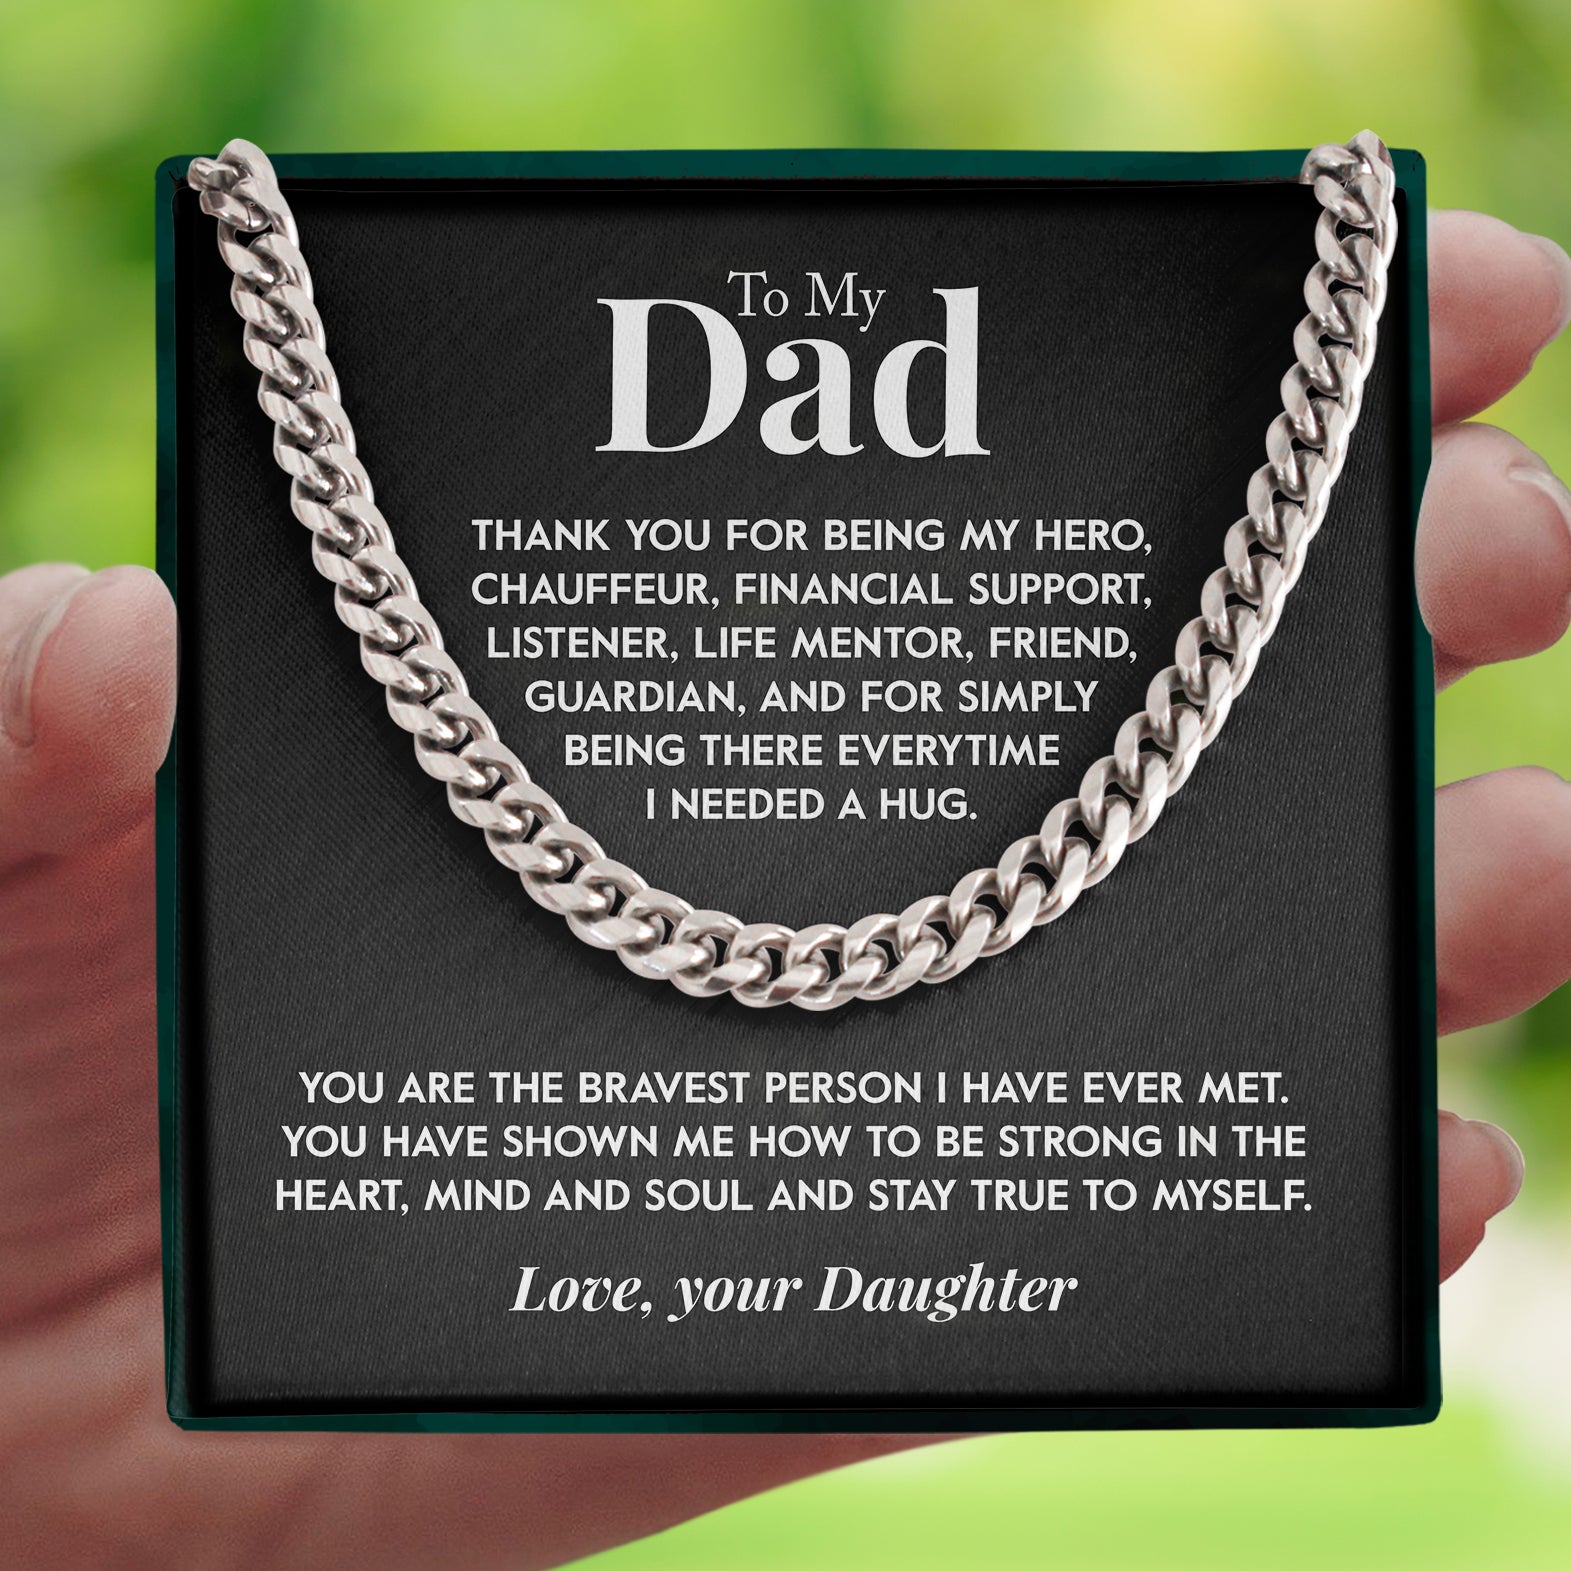 To My Dad | "The Bravest Person" | Cuban Chain Link